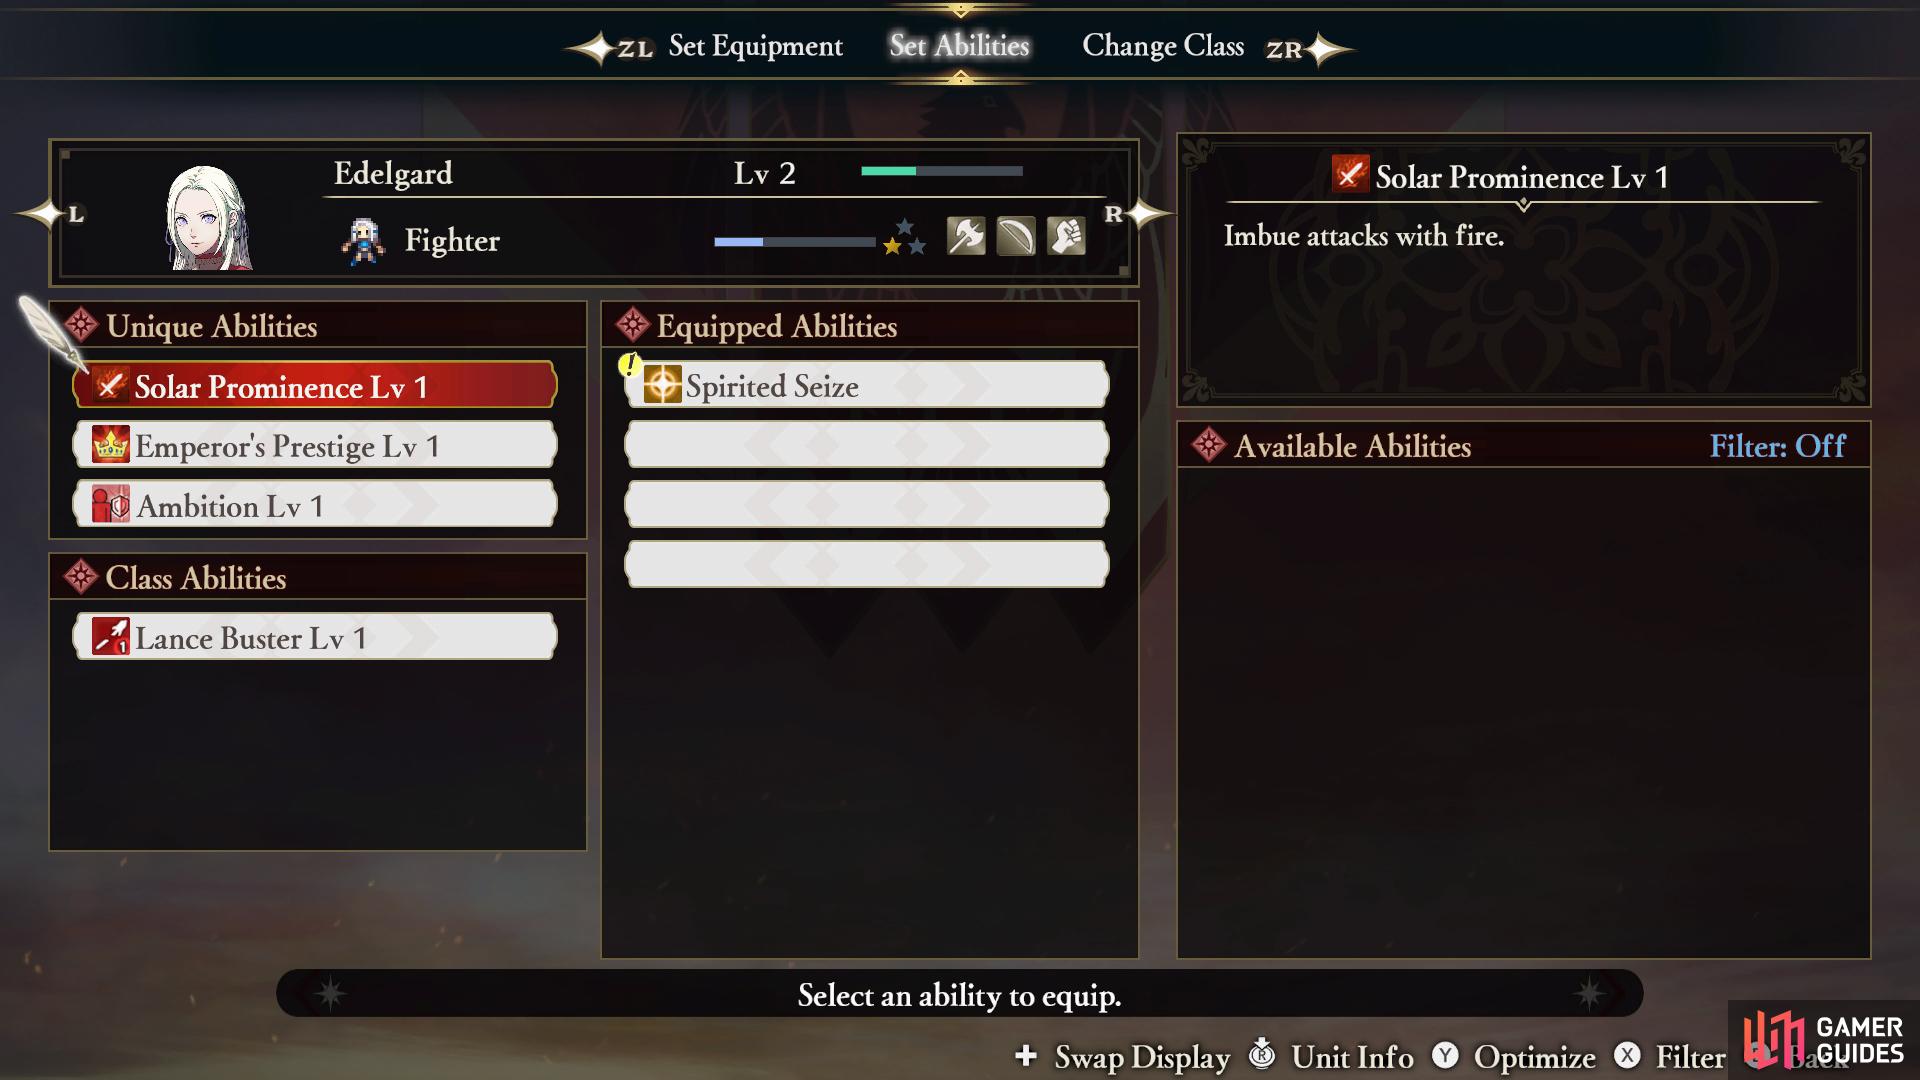 Solar Prominence adds the fire element to Edelgard's attacks.